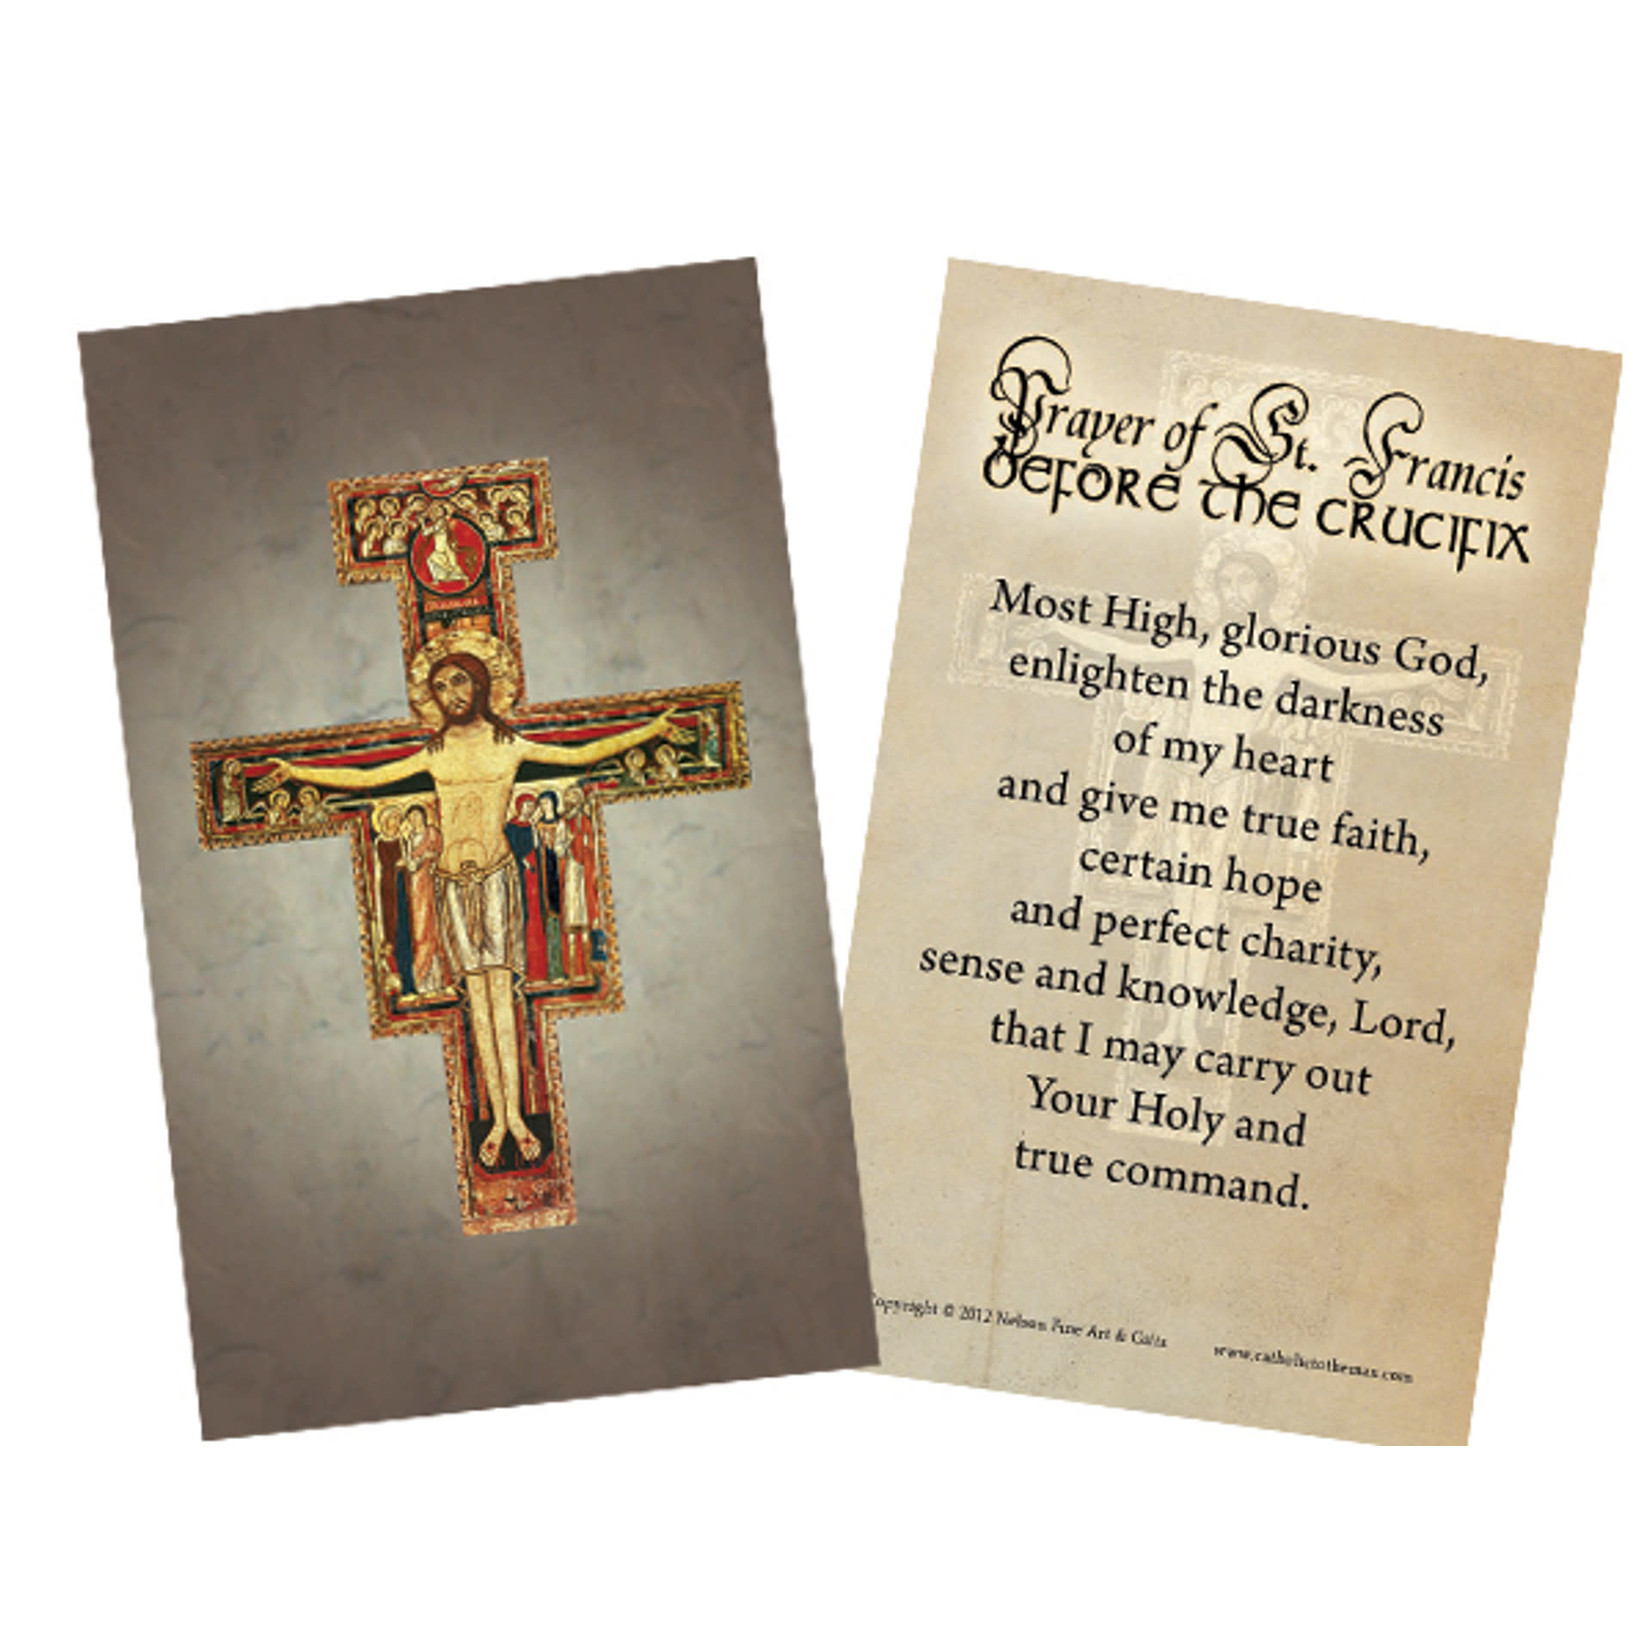 Prayer Card Prayer of St Francis Before the Crucifix